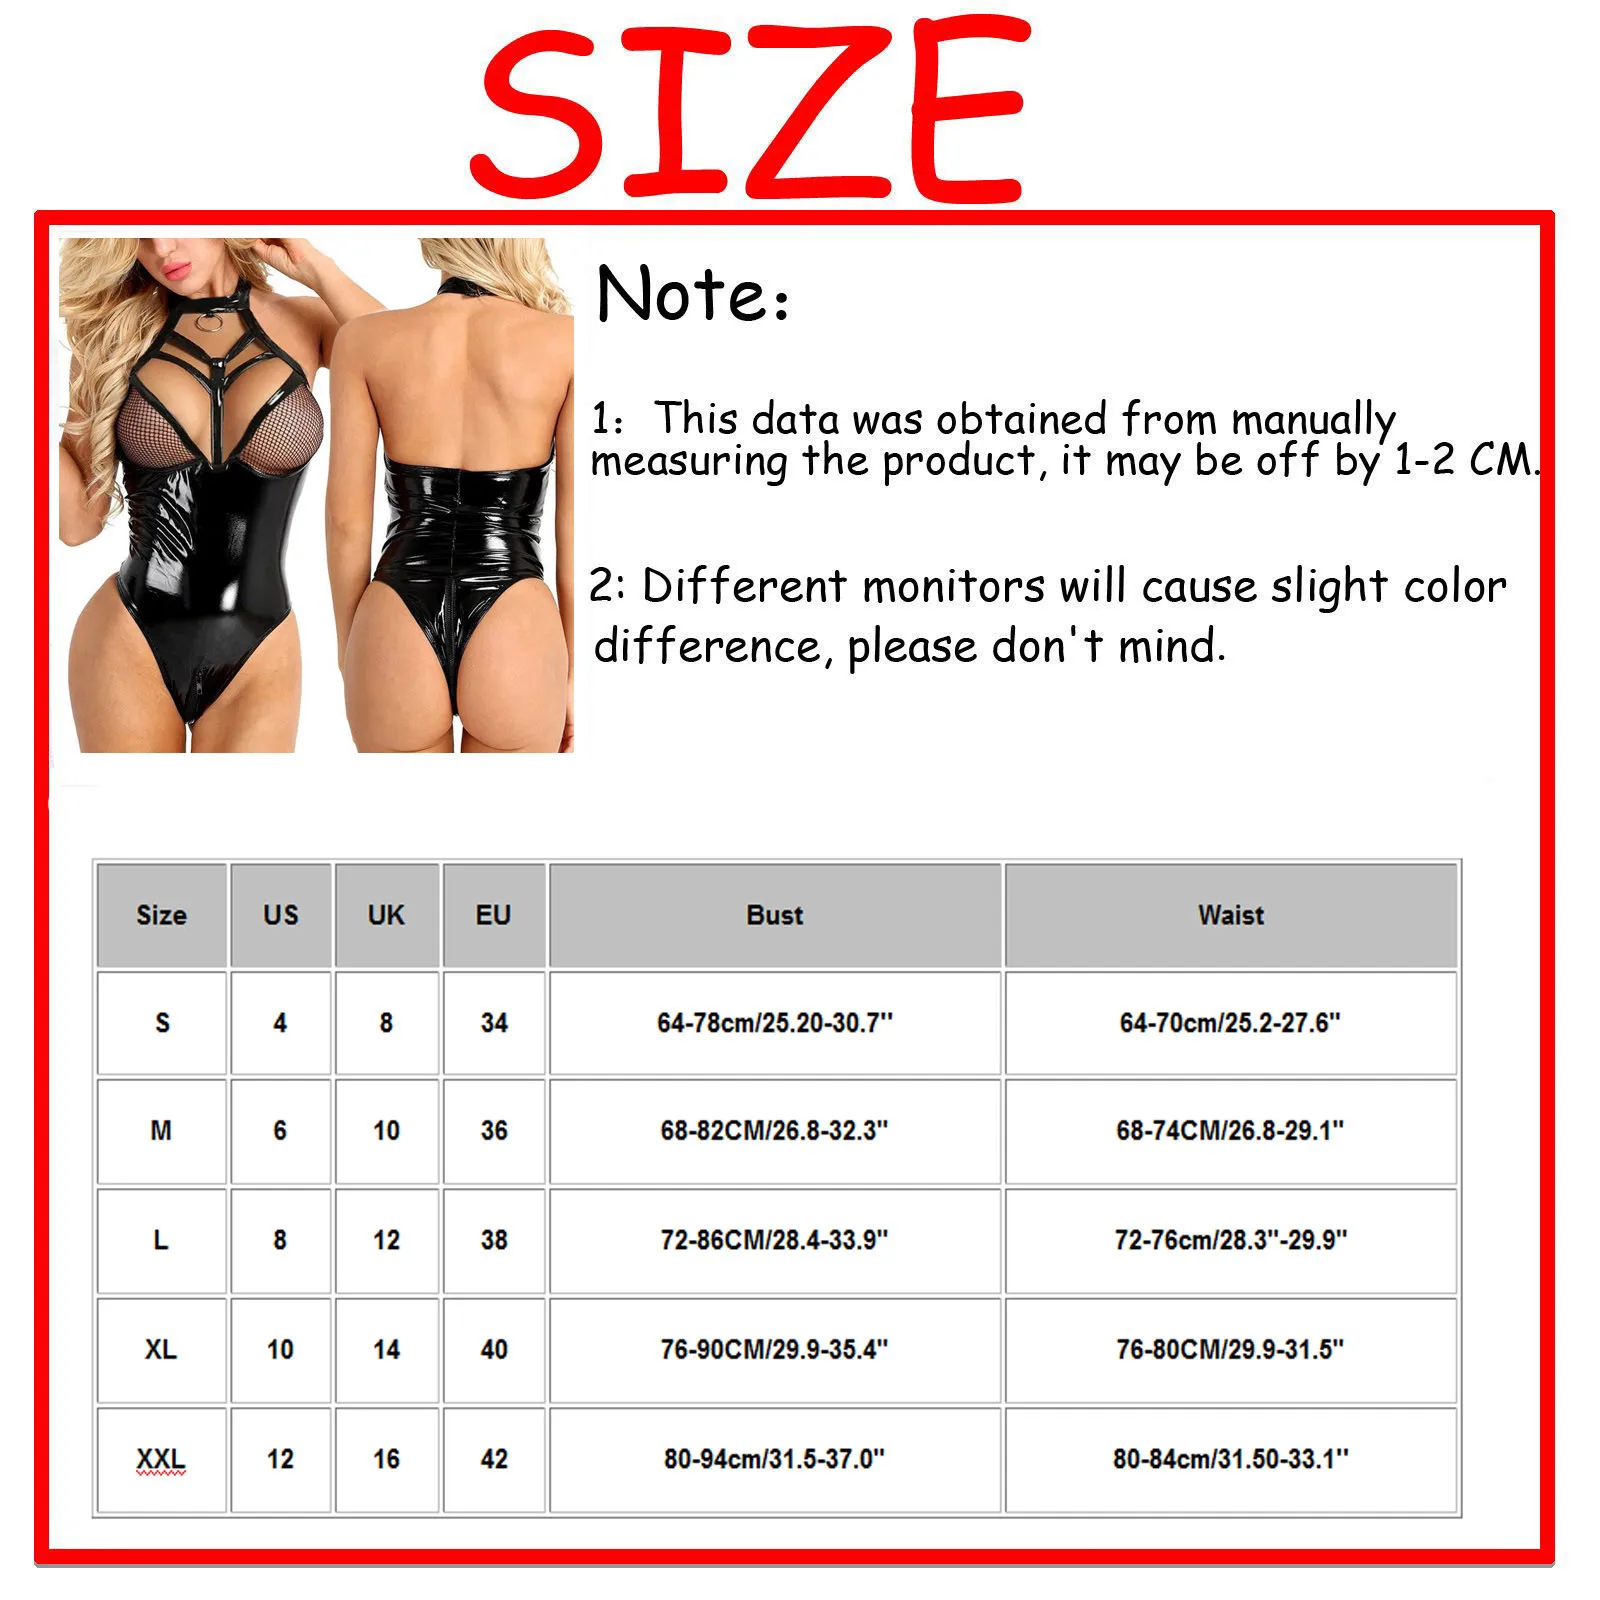 bra sets Womens Hot Wet Look Exotic Teddies Leather Lingerie Nipples Cups Zippered Crotch High Cut Bodysuit Catsuit Clubwear Large Size ladies underwear sets